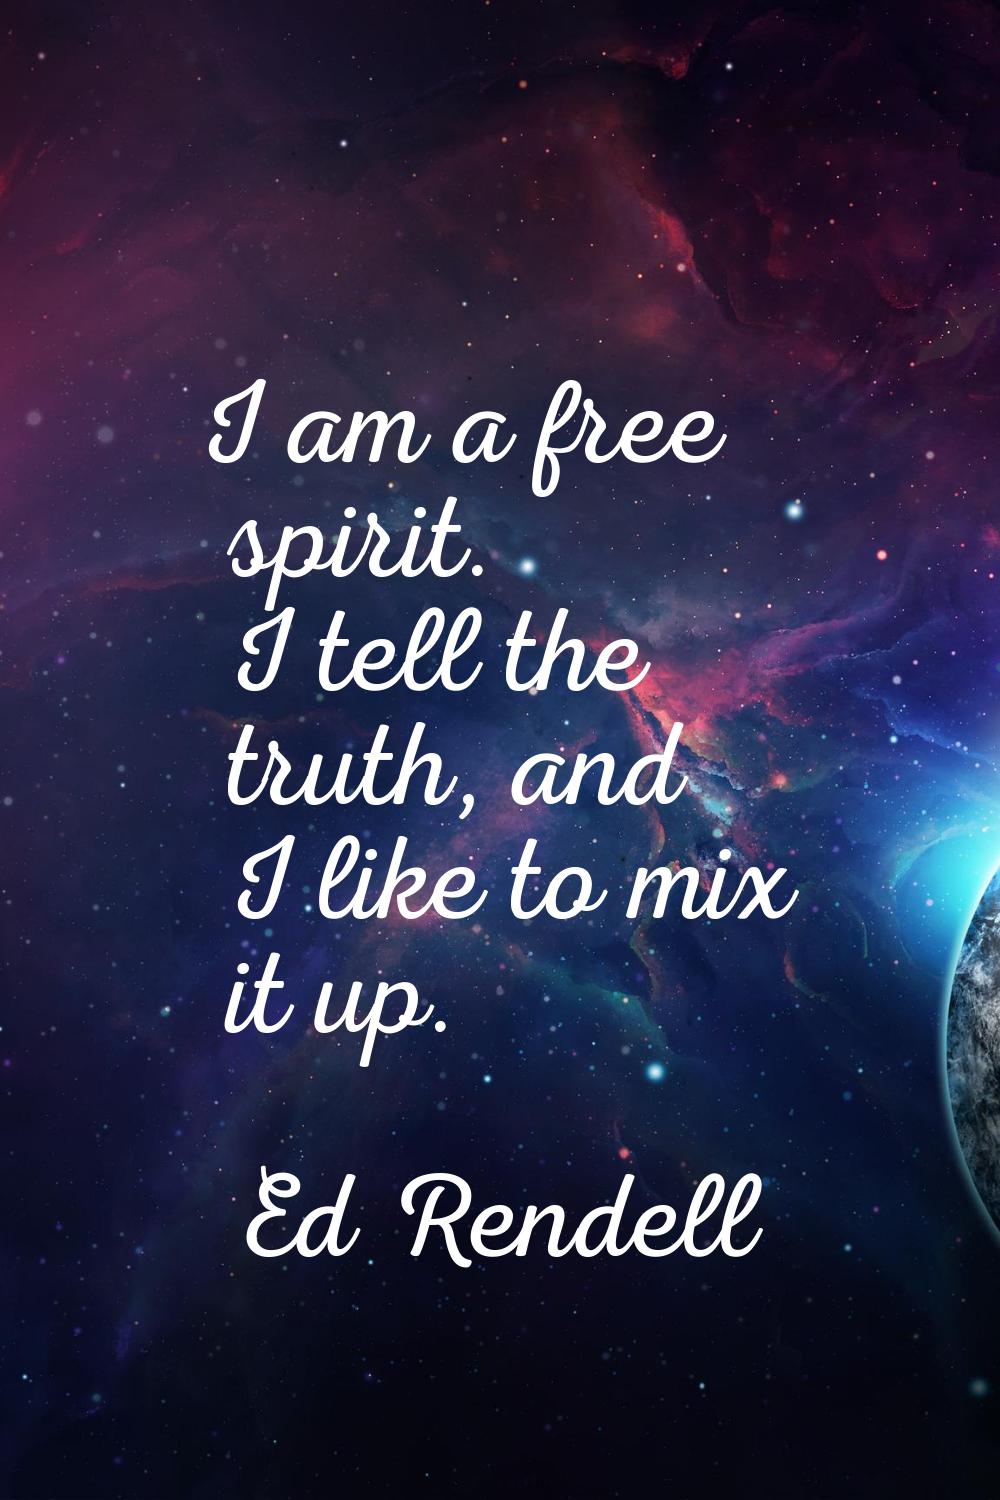 I am a free spirit. I tell the truth, and I like to mix it up.